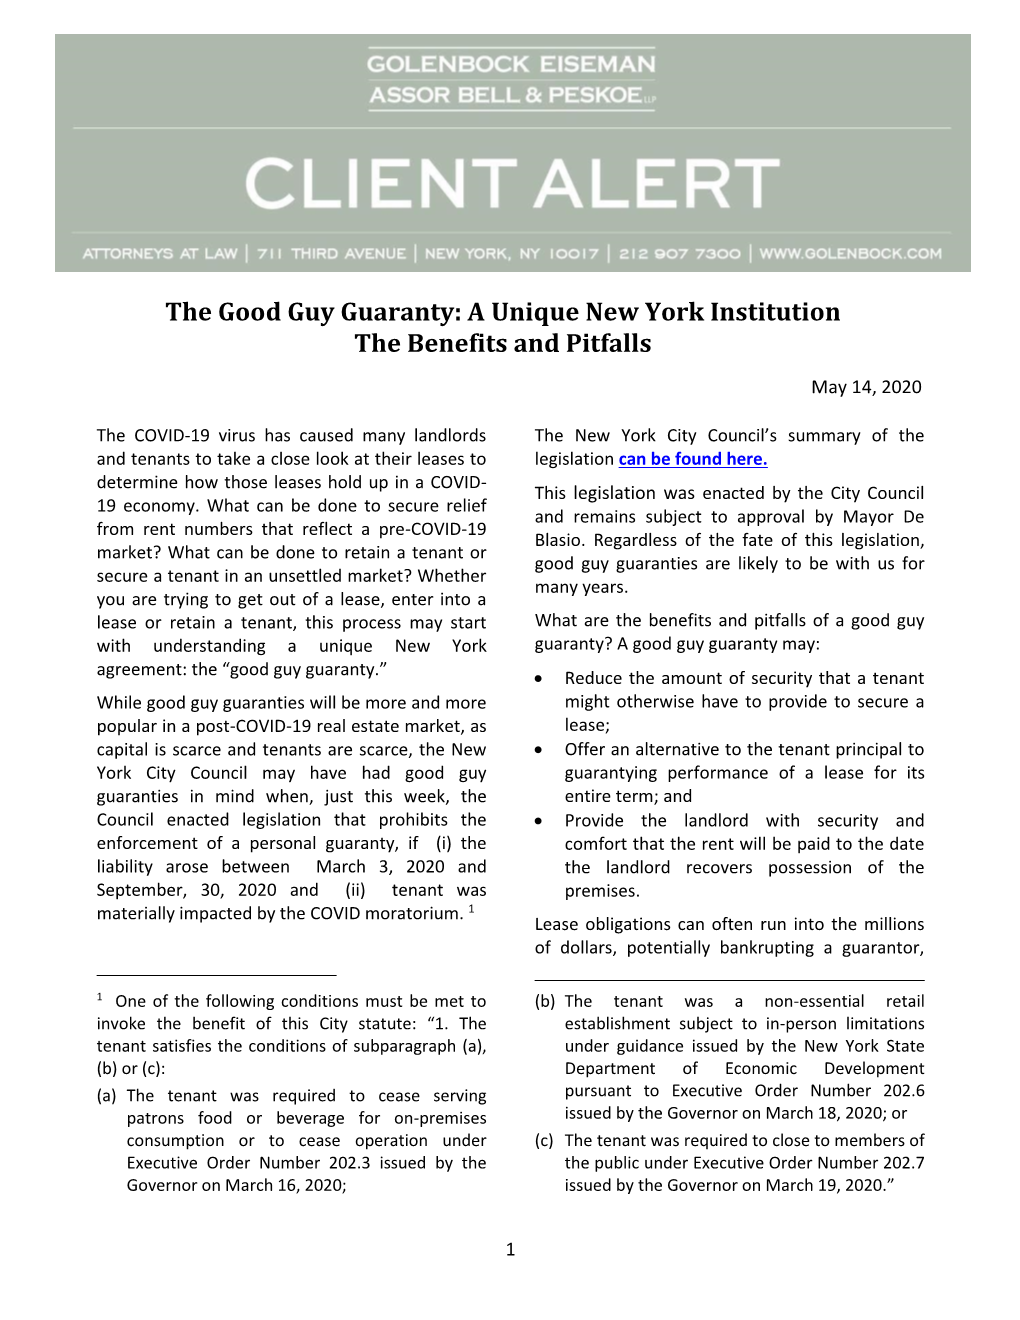 The Good Guy Guaranty: a Unique New York Institution the Benefits and Pitfalls